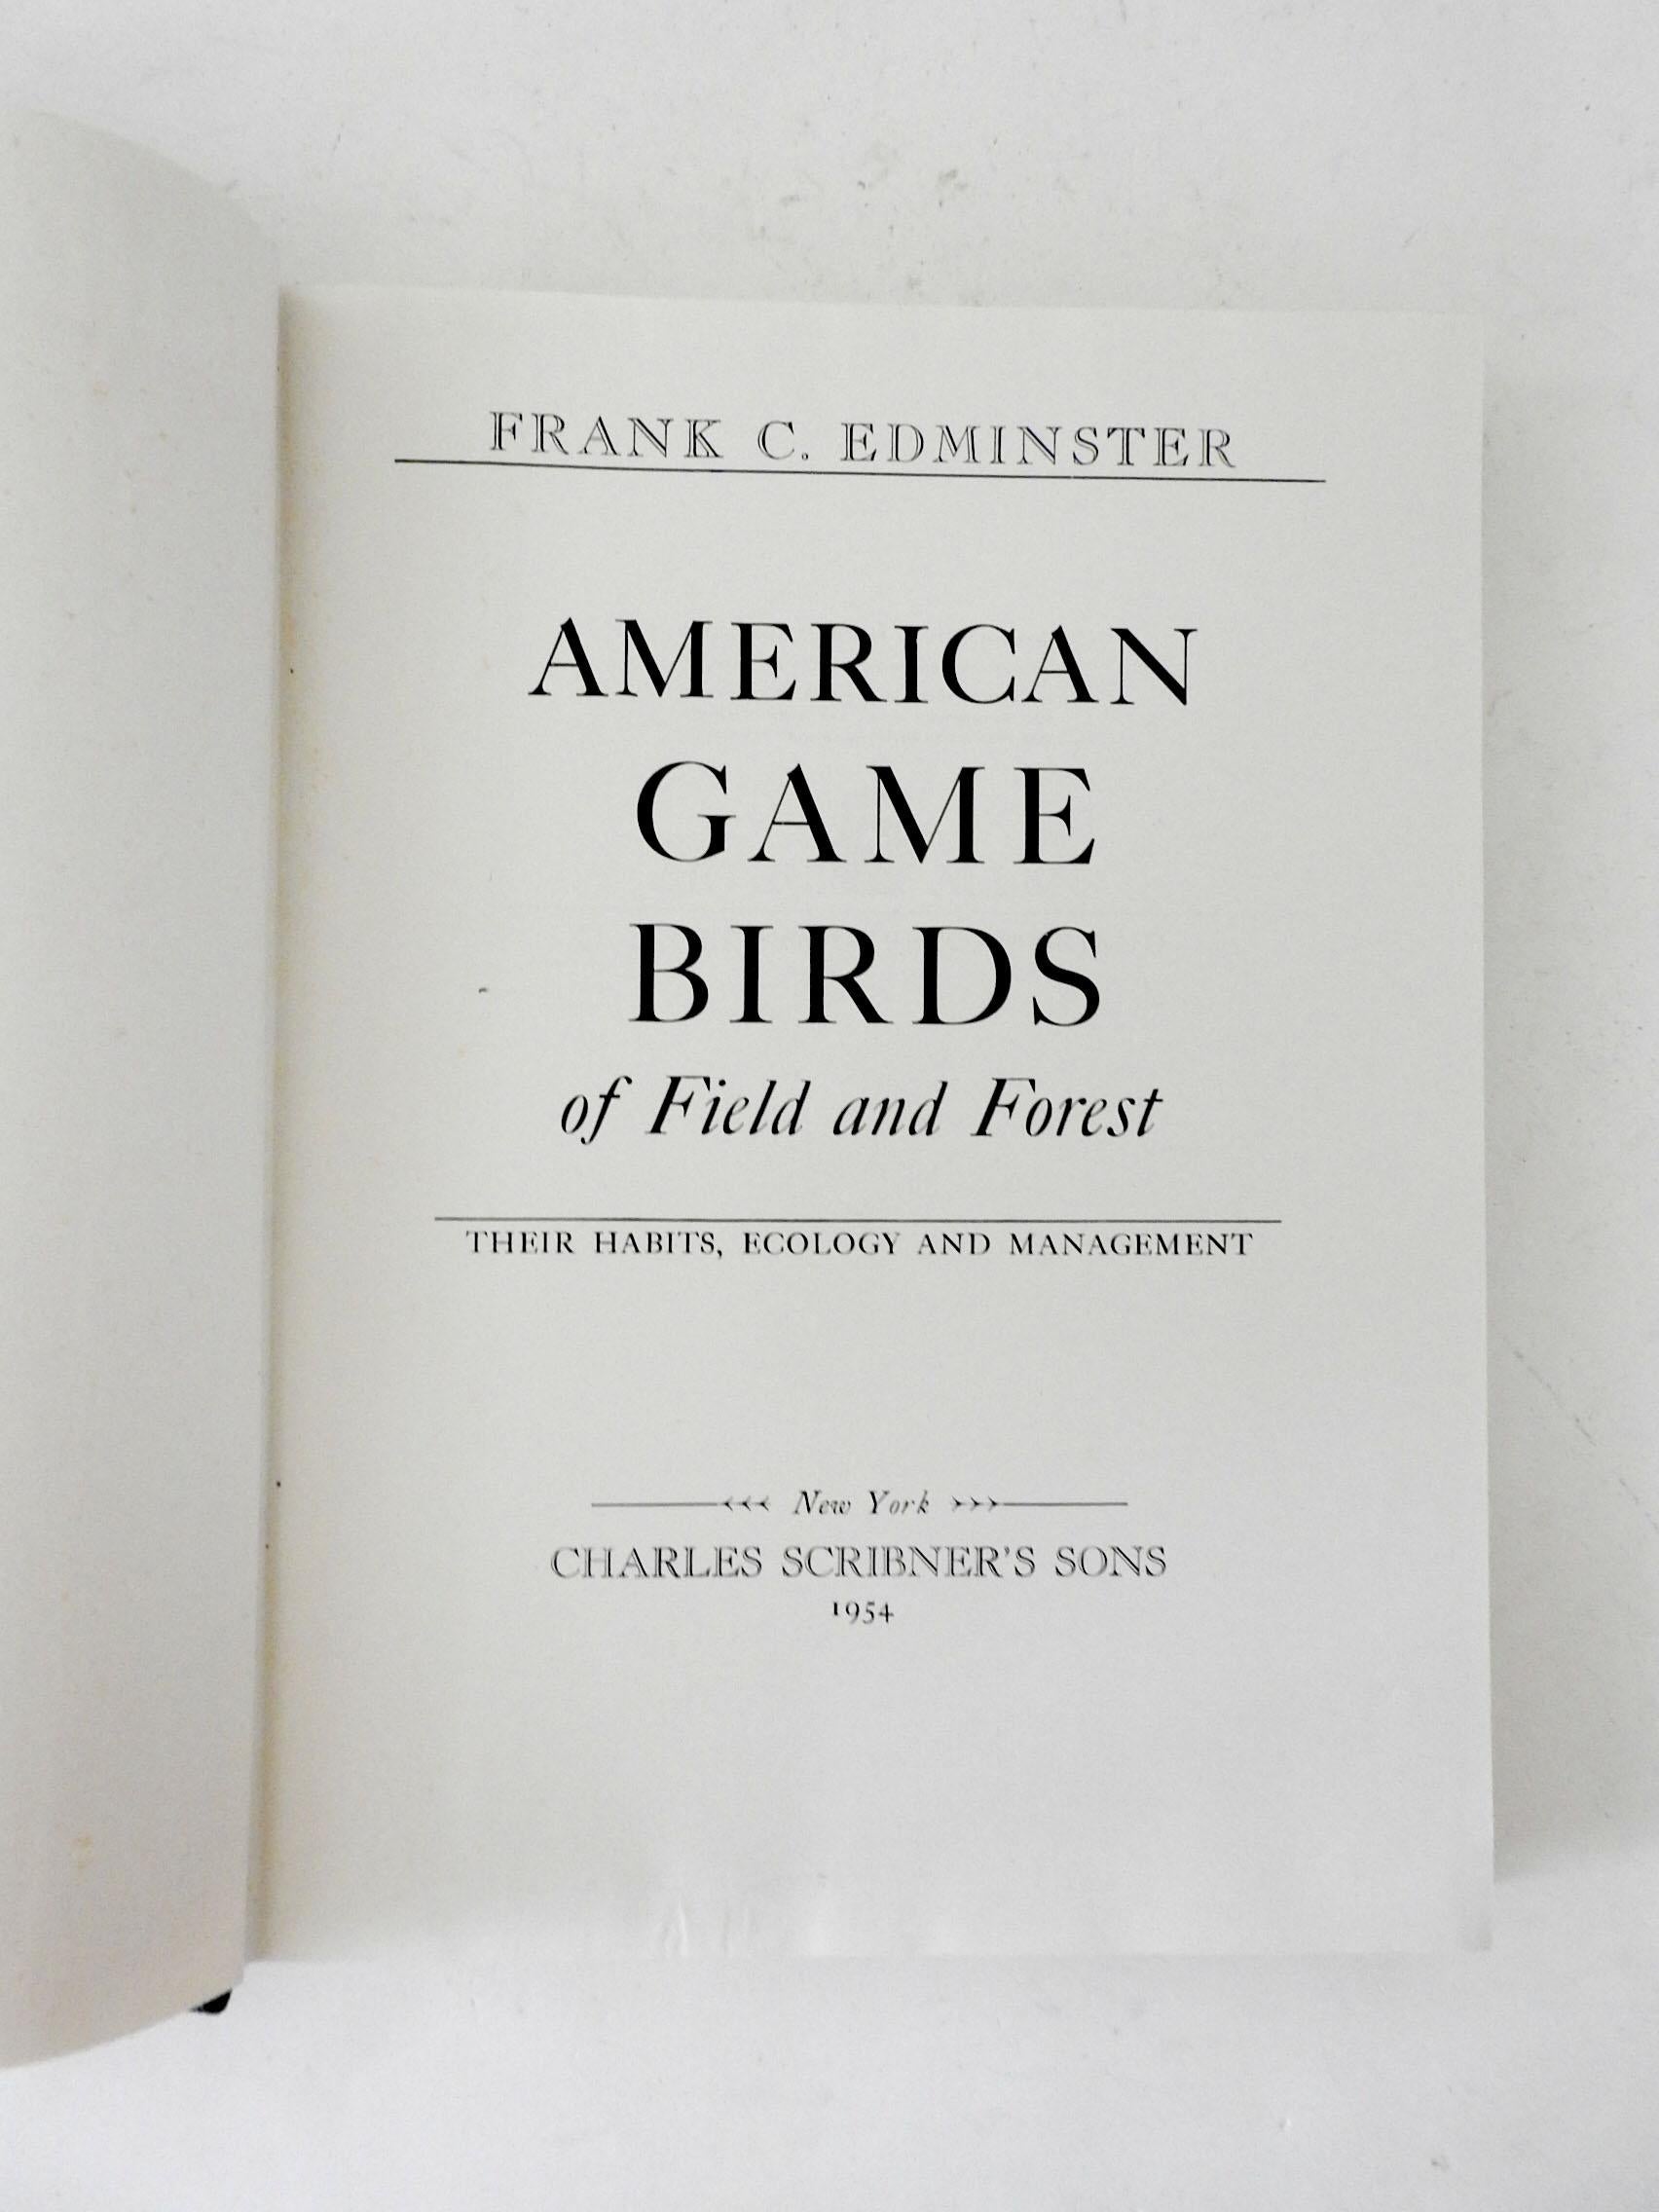 American game birds of Field and Forest: Their Habits, Ecology, and Management by Frank C. Edminster. Published by Charles Scribner's Sons; 1st edition, 1954. A chapter to each species.their origin and history.geographic range, eating, courting,